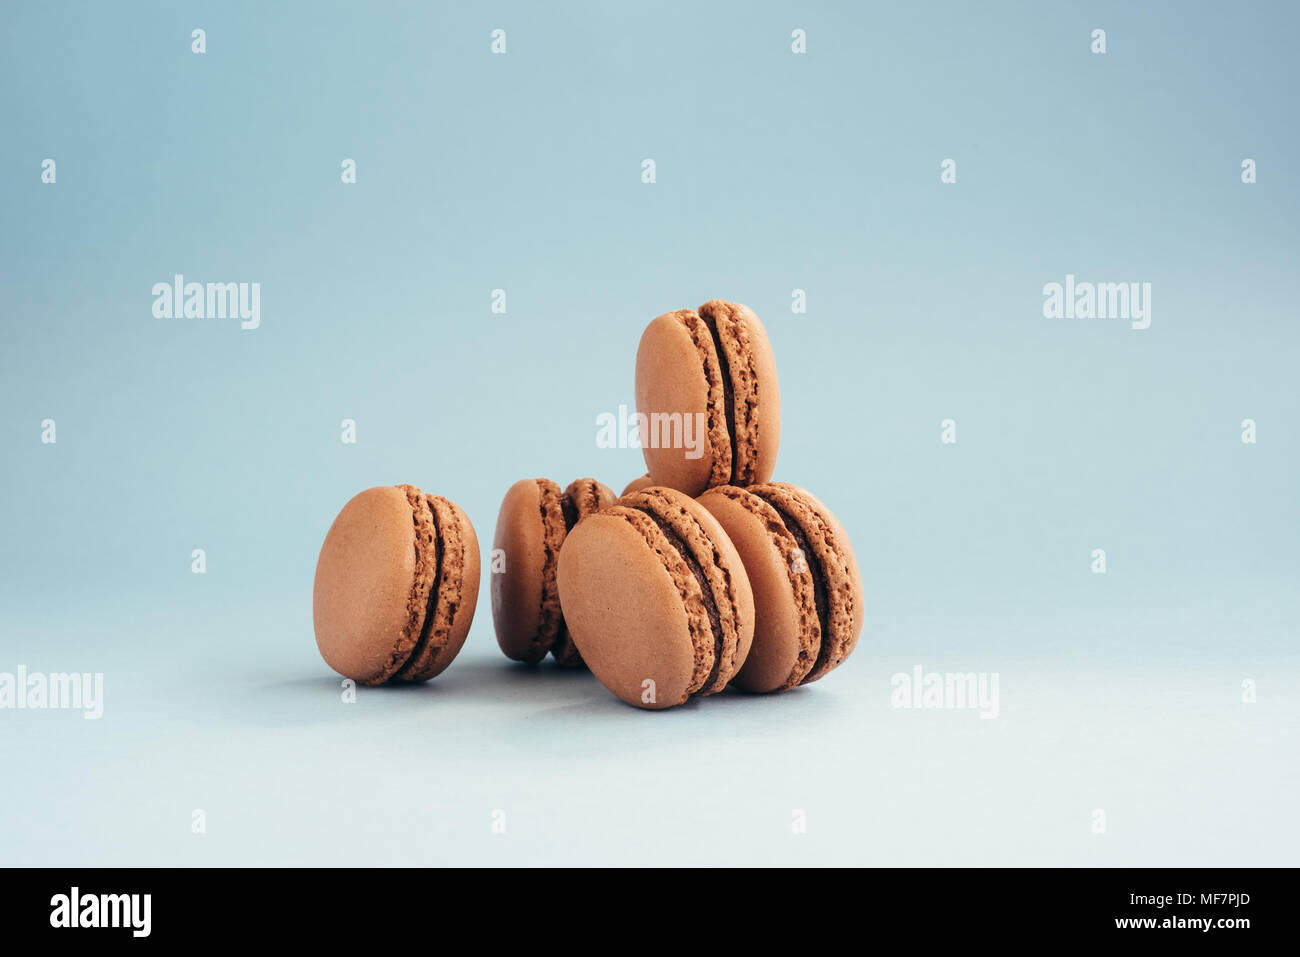 Chocolate macarons isolated on a blue background. Stock Photo